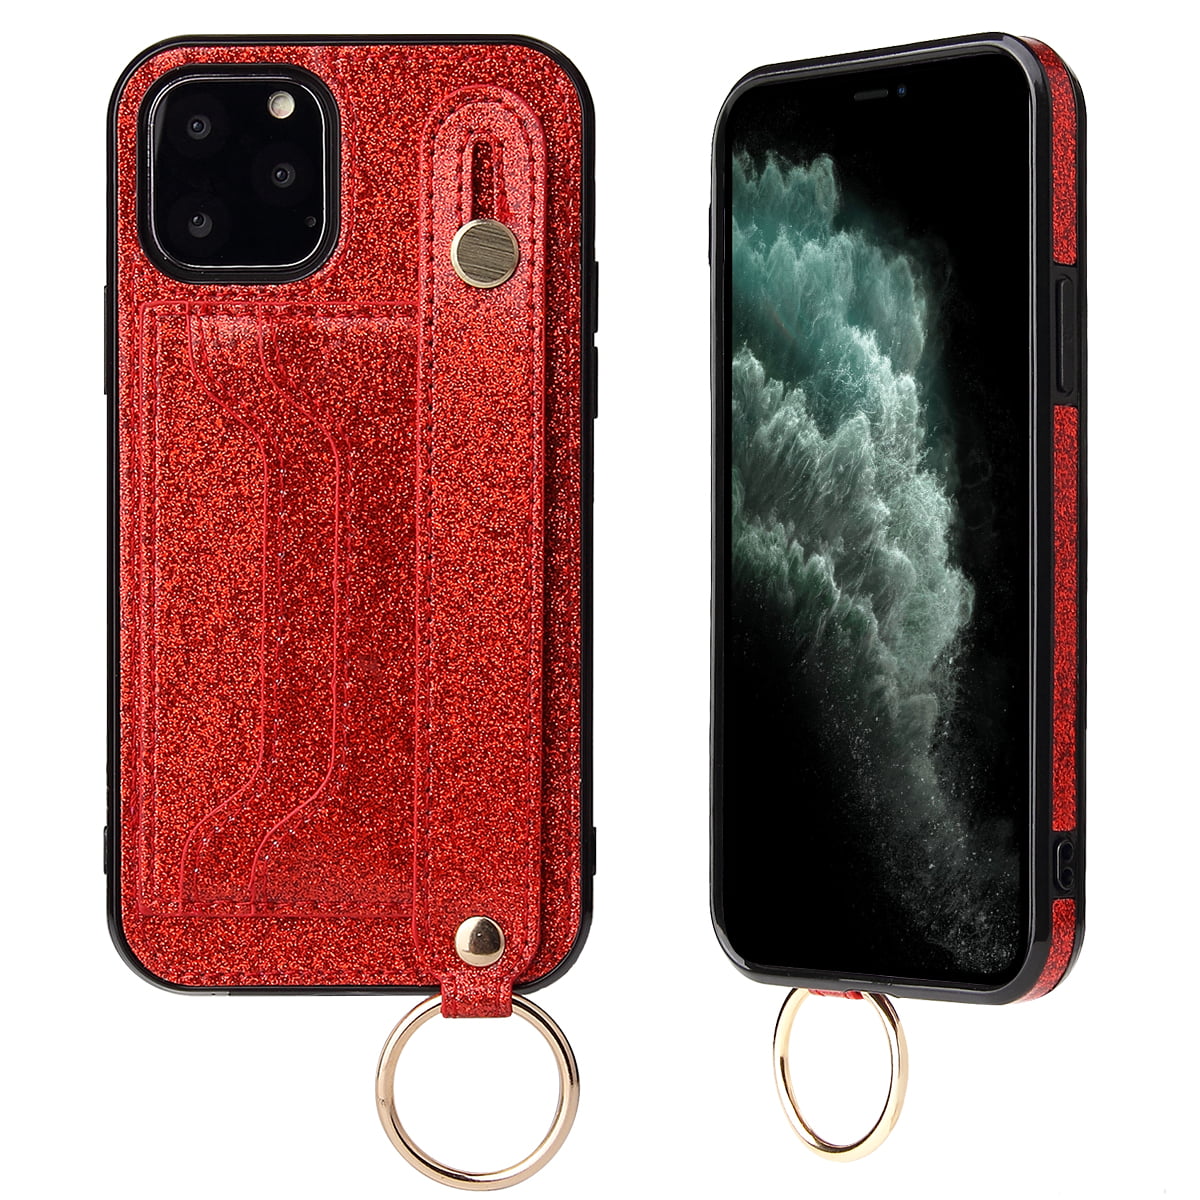 iPhone 11 Pro Max Case Wallet, Allytech Glitter PU Leather ...